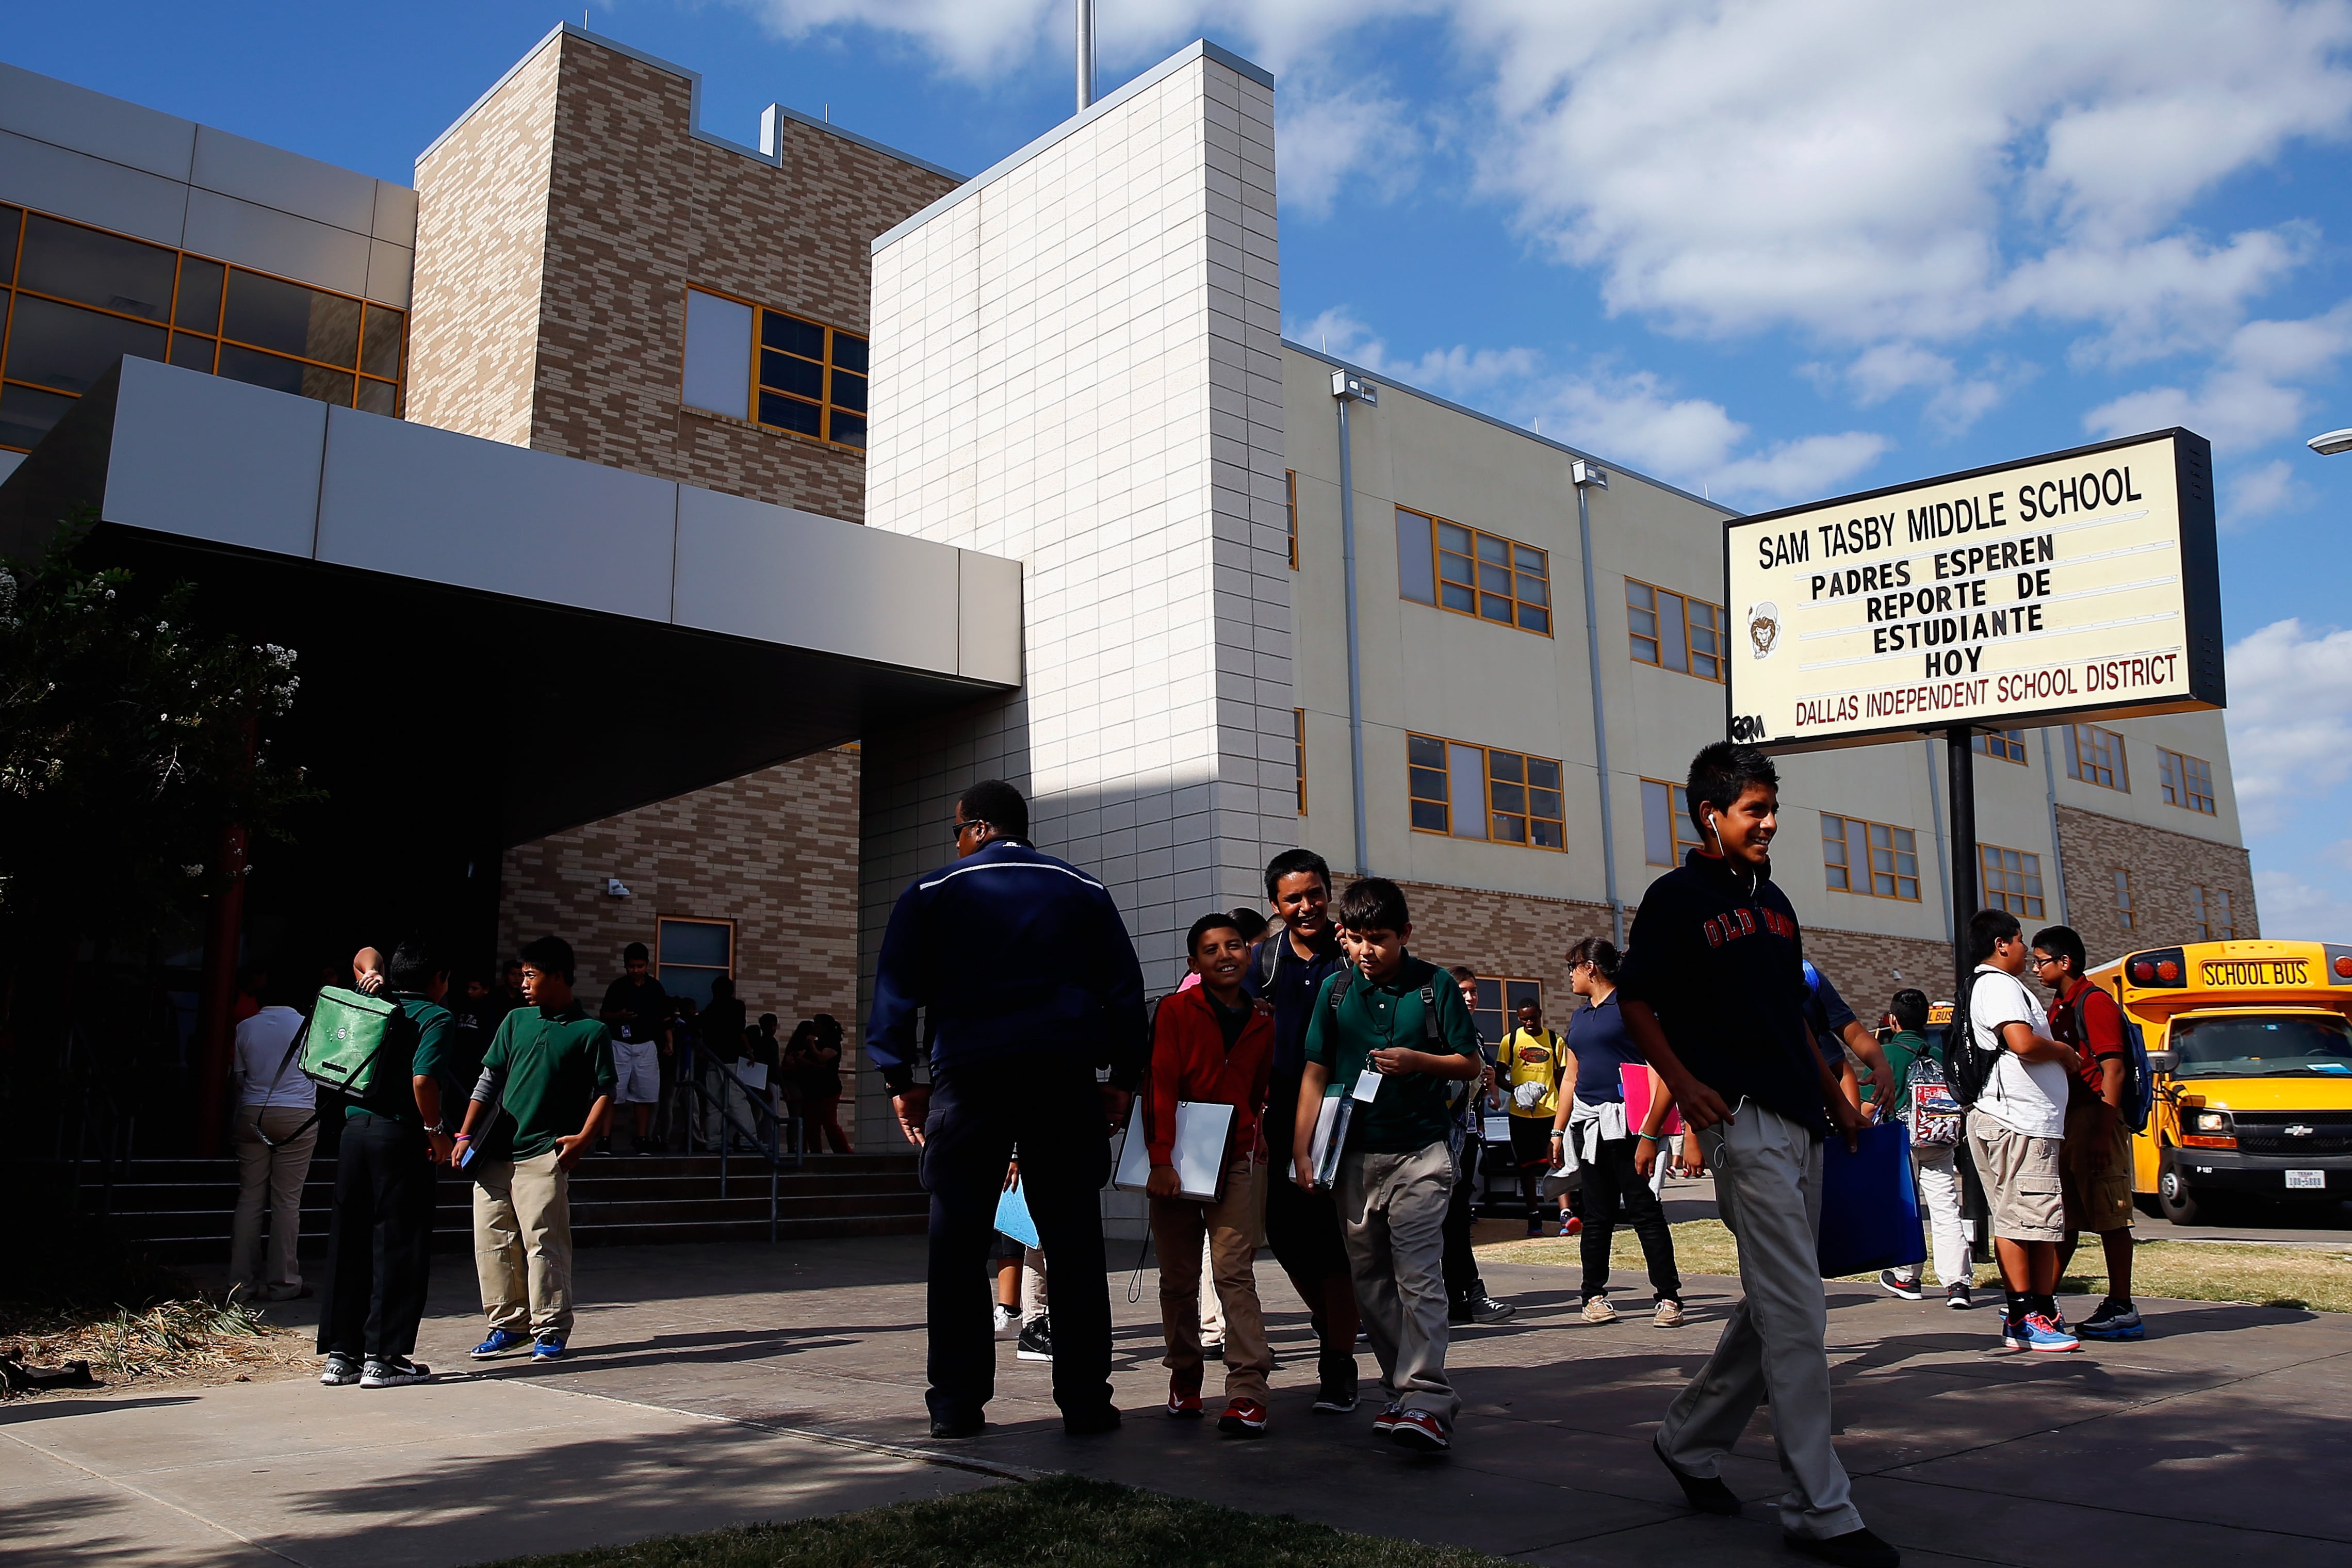 Students gather outside of Sam Tasby Middle School on a bright, sunny day.